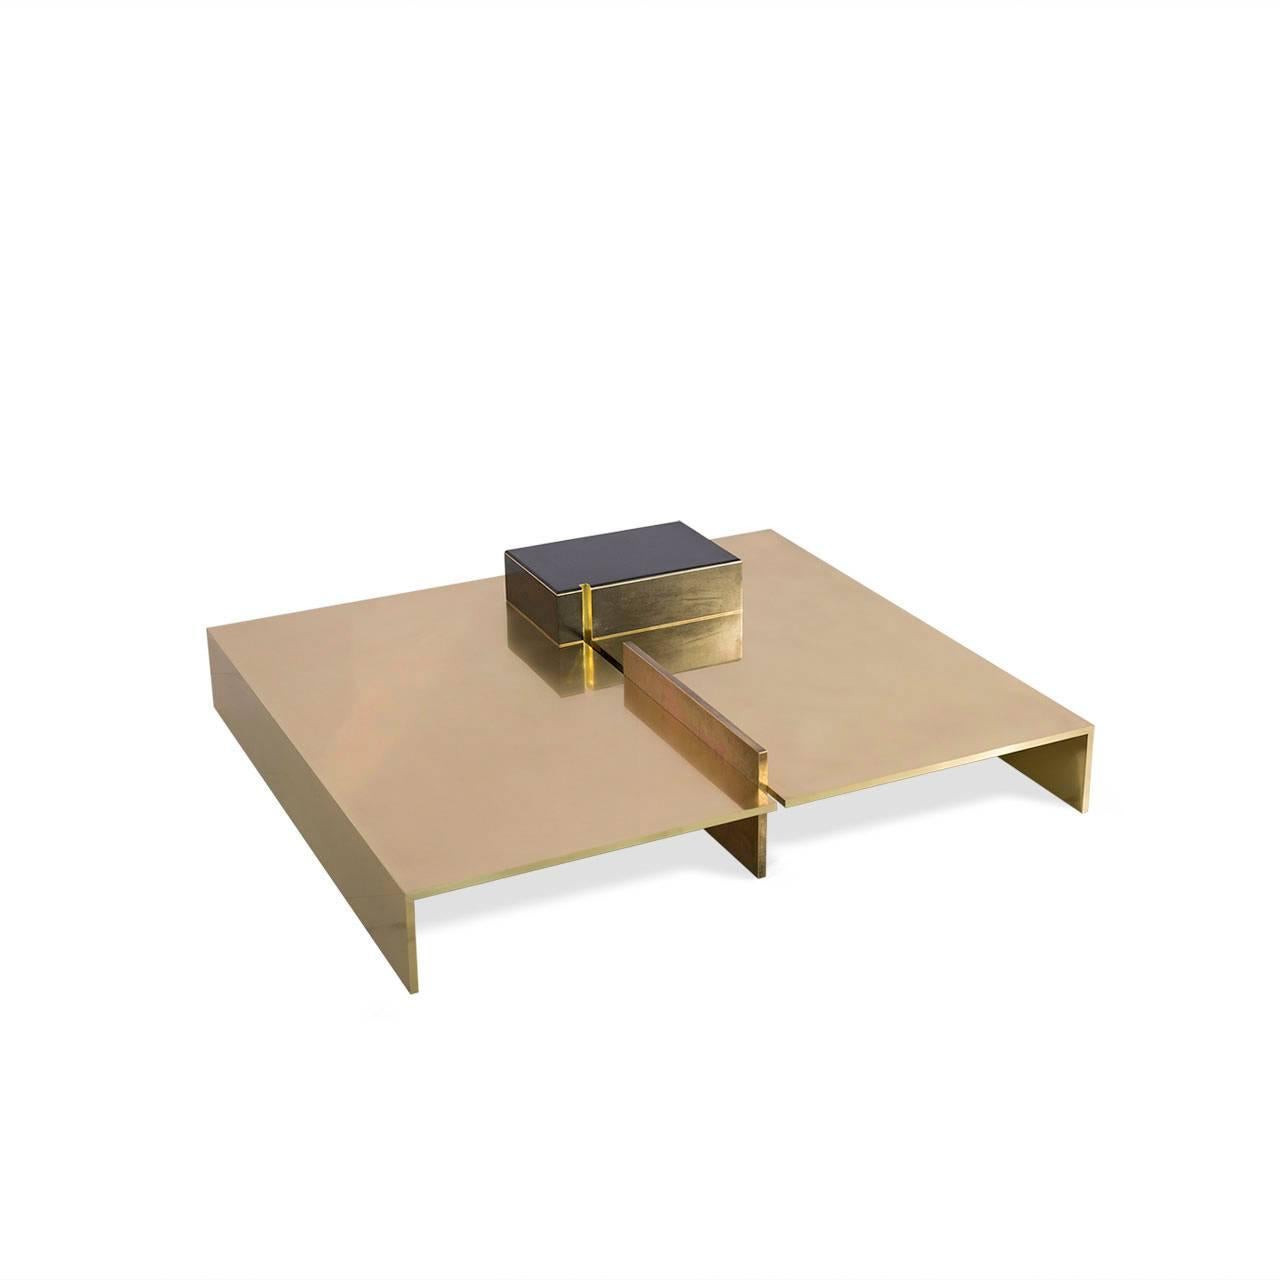 The MMXVIS1 low sitting center table is made of wood backed polished brass. A slight Japanese aesthetic influence is present, and the piece combines well with both contemporary modern settings and more casual design environments. The small vertical